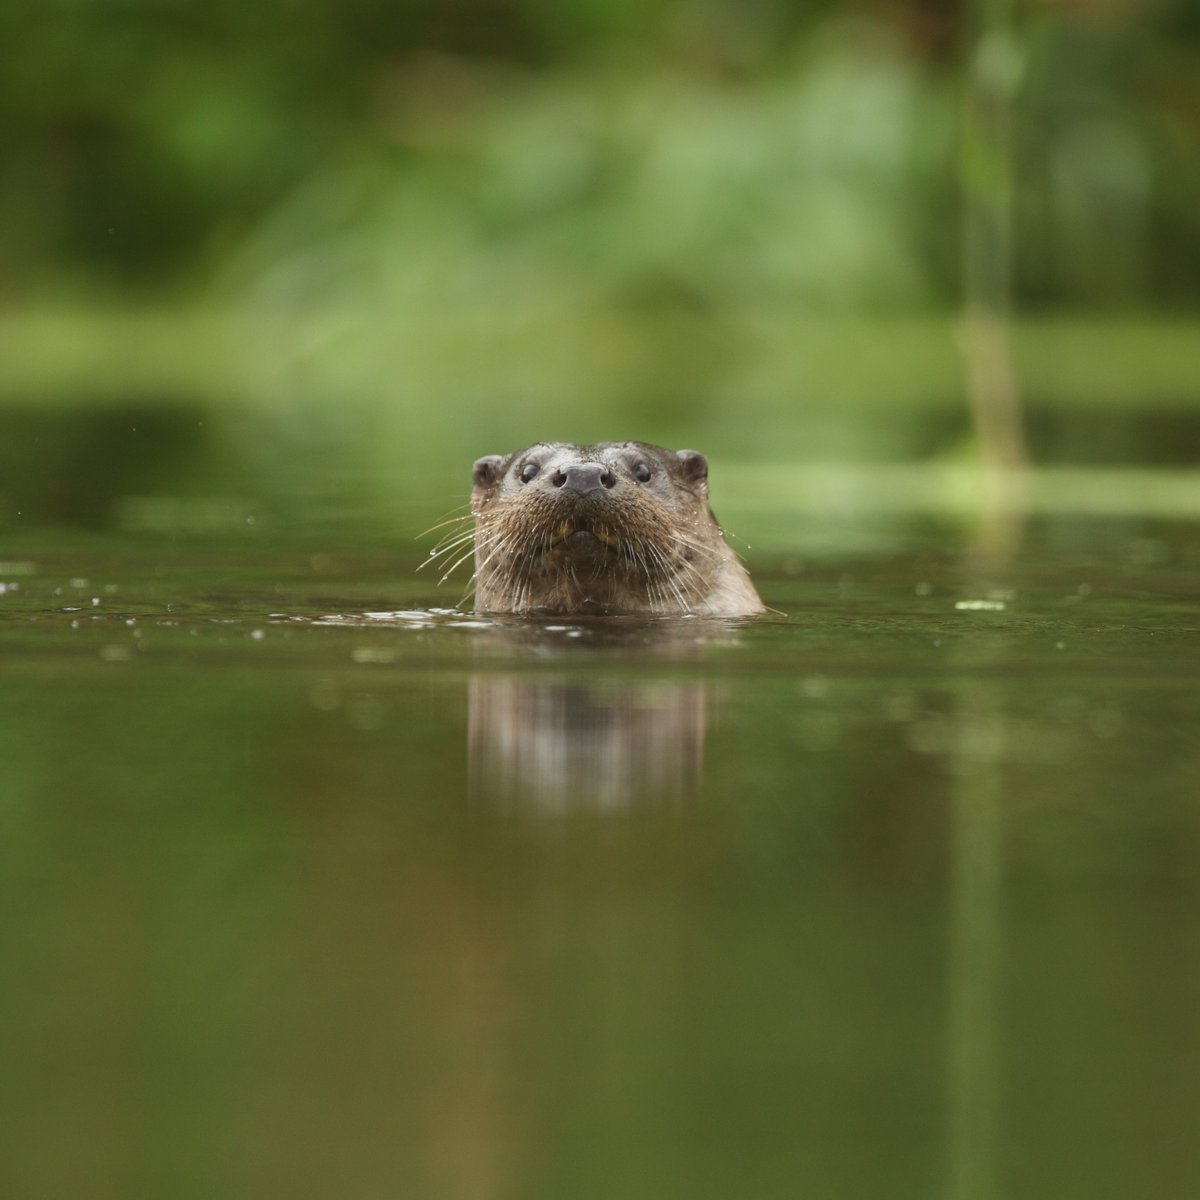 Can you raise £30 for #30DaysWild? 🦦 This June, we're asking our supporters to take on a #WILDFundraiser challenge to help protect Welsh wildlife! 🦡 👉Find out more: welshwildlife.org/take-wildfundr… 📸 Luke Massey/2020VISION